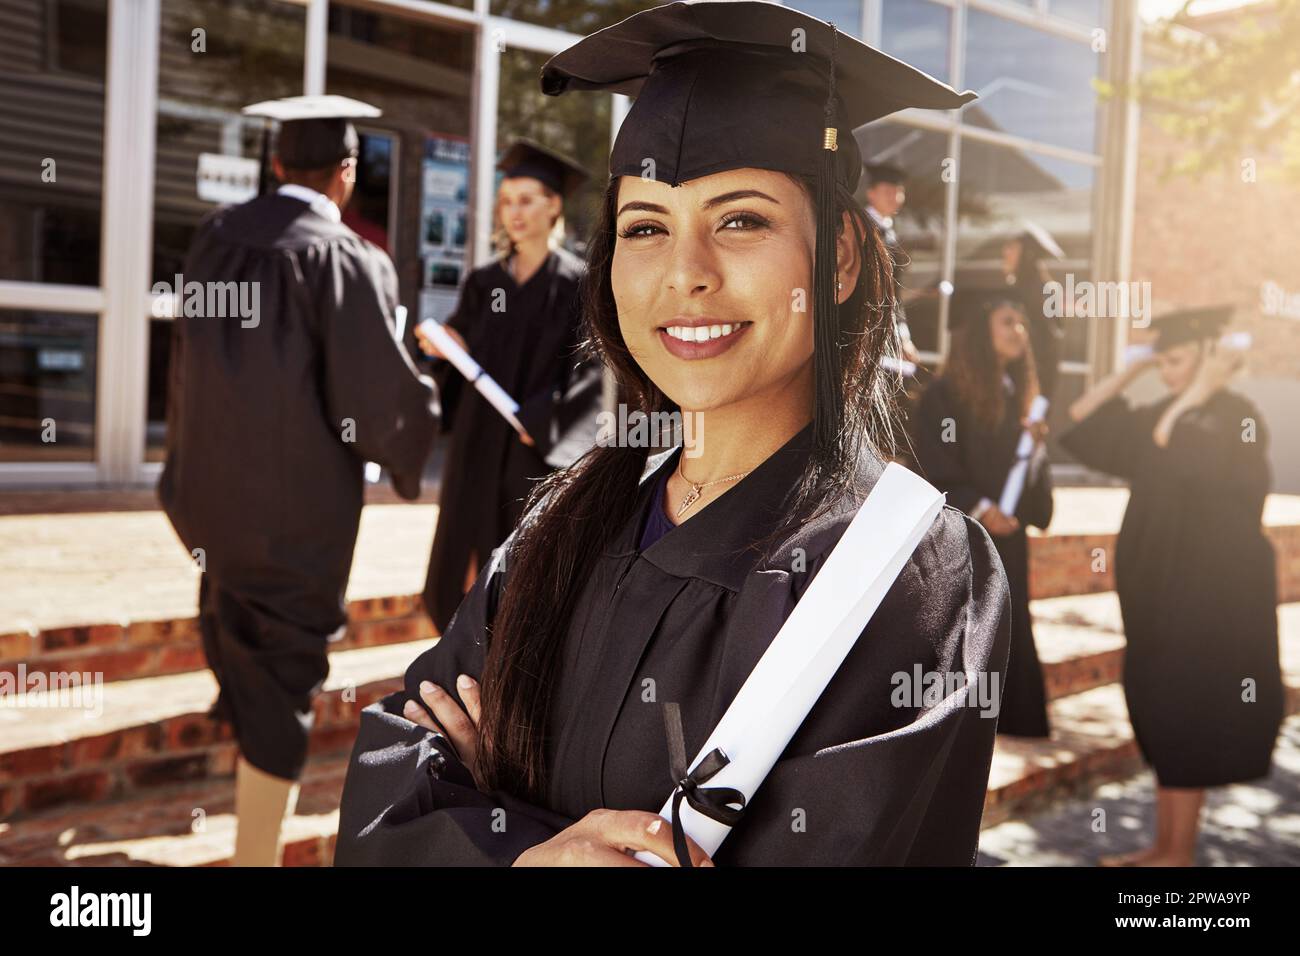 I studied hard to get here today. Portrait of a smiling university student holding her diploma outside on graduation day. Stock Photo